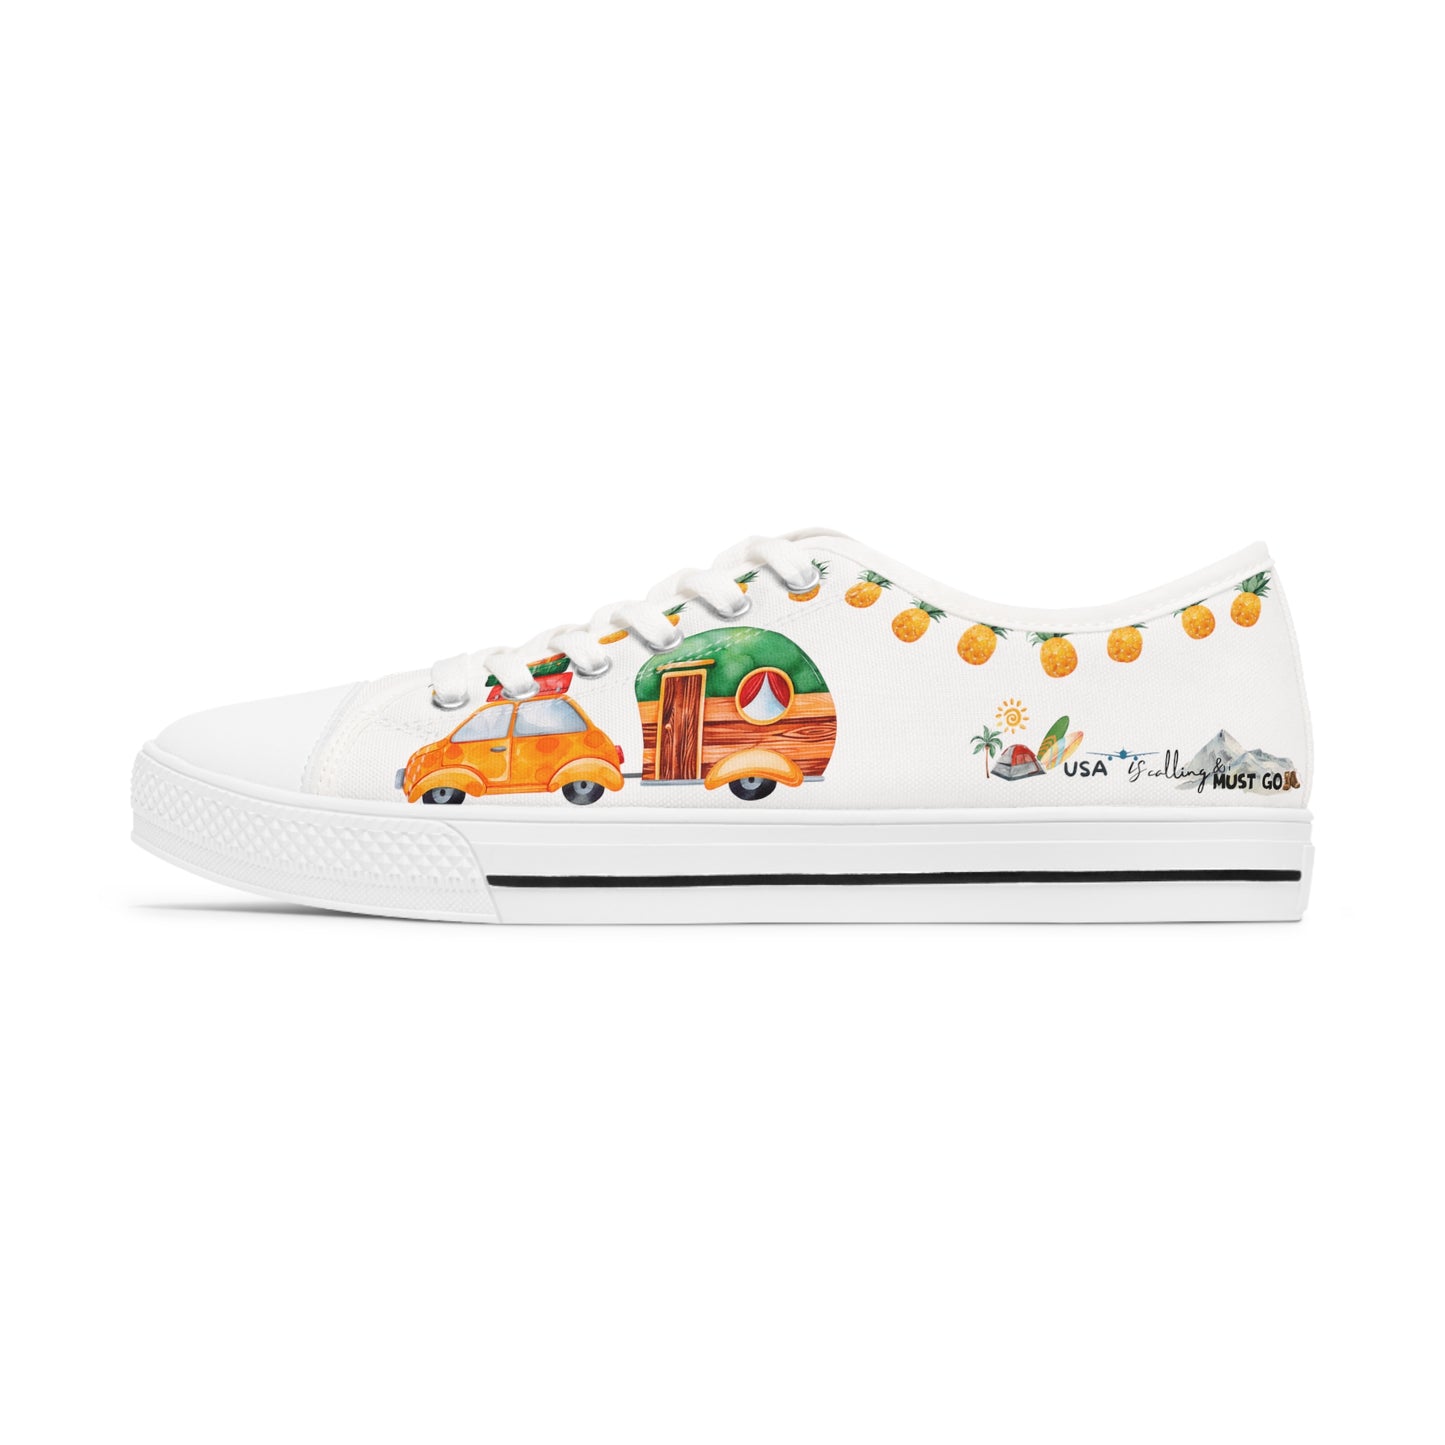 USA is calling & i must Go- Turtle Travel Edition - White Background Sneakers